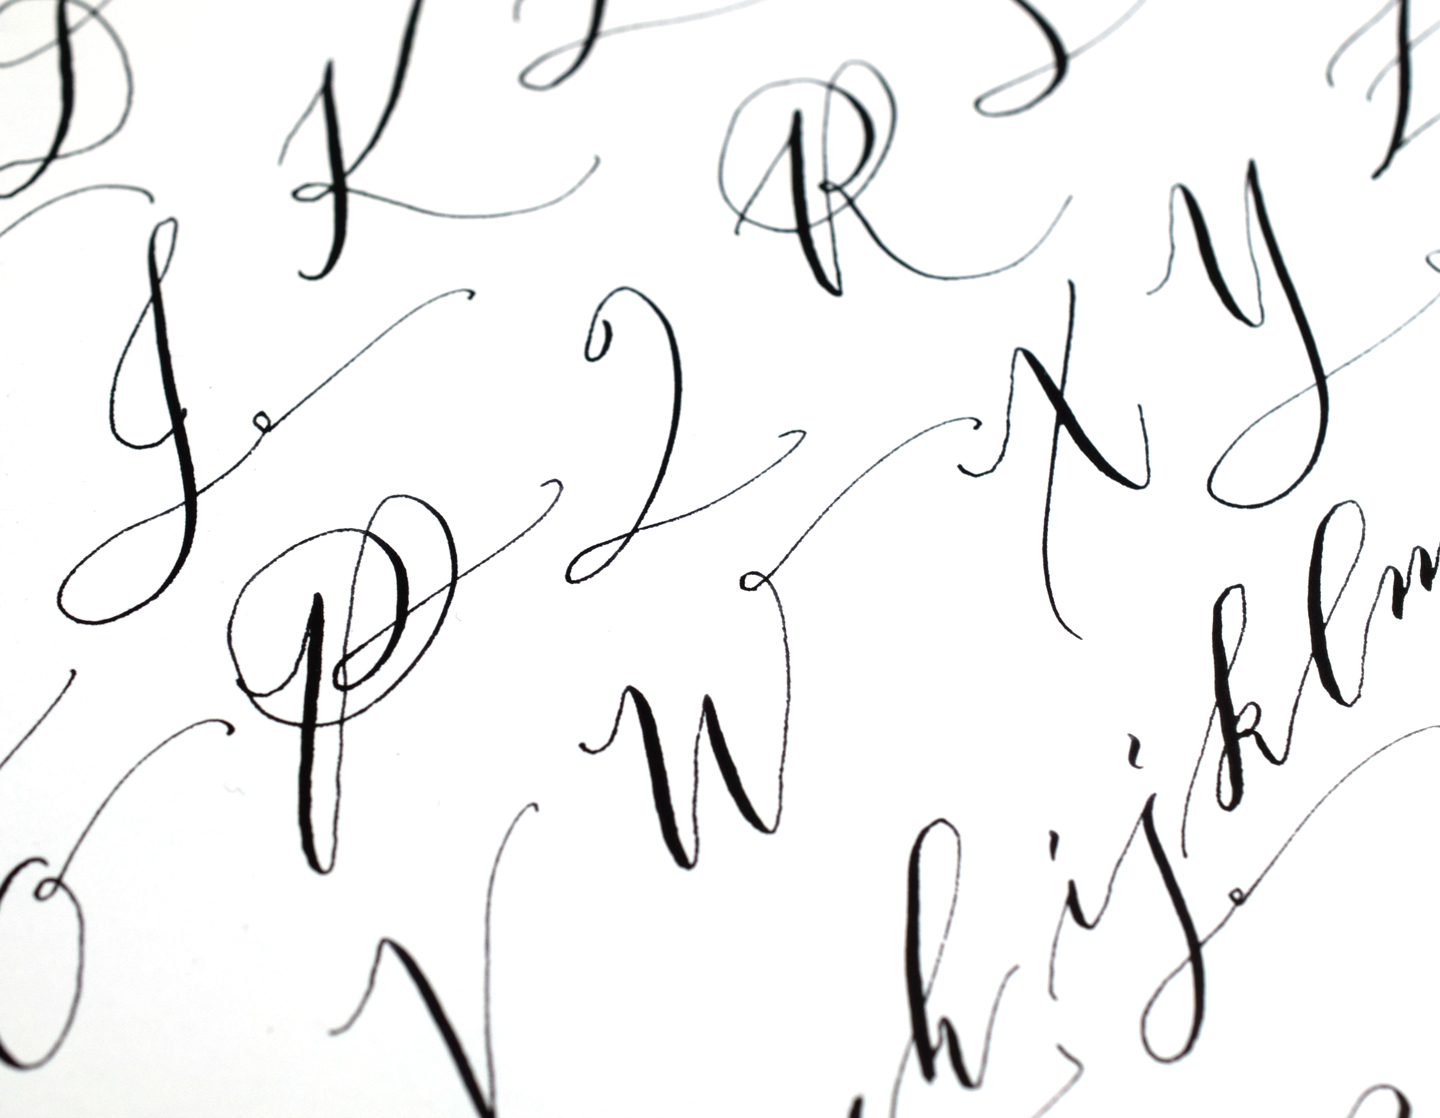 A Calligraphy Practice Reality Check